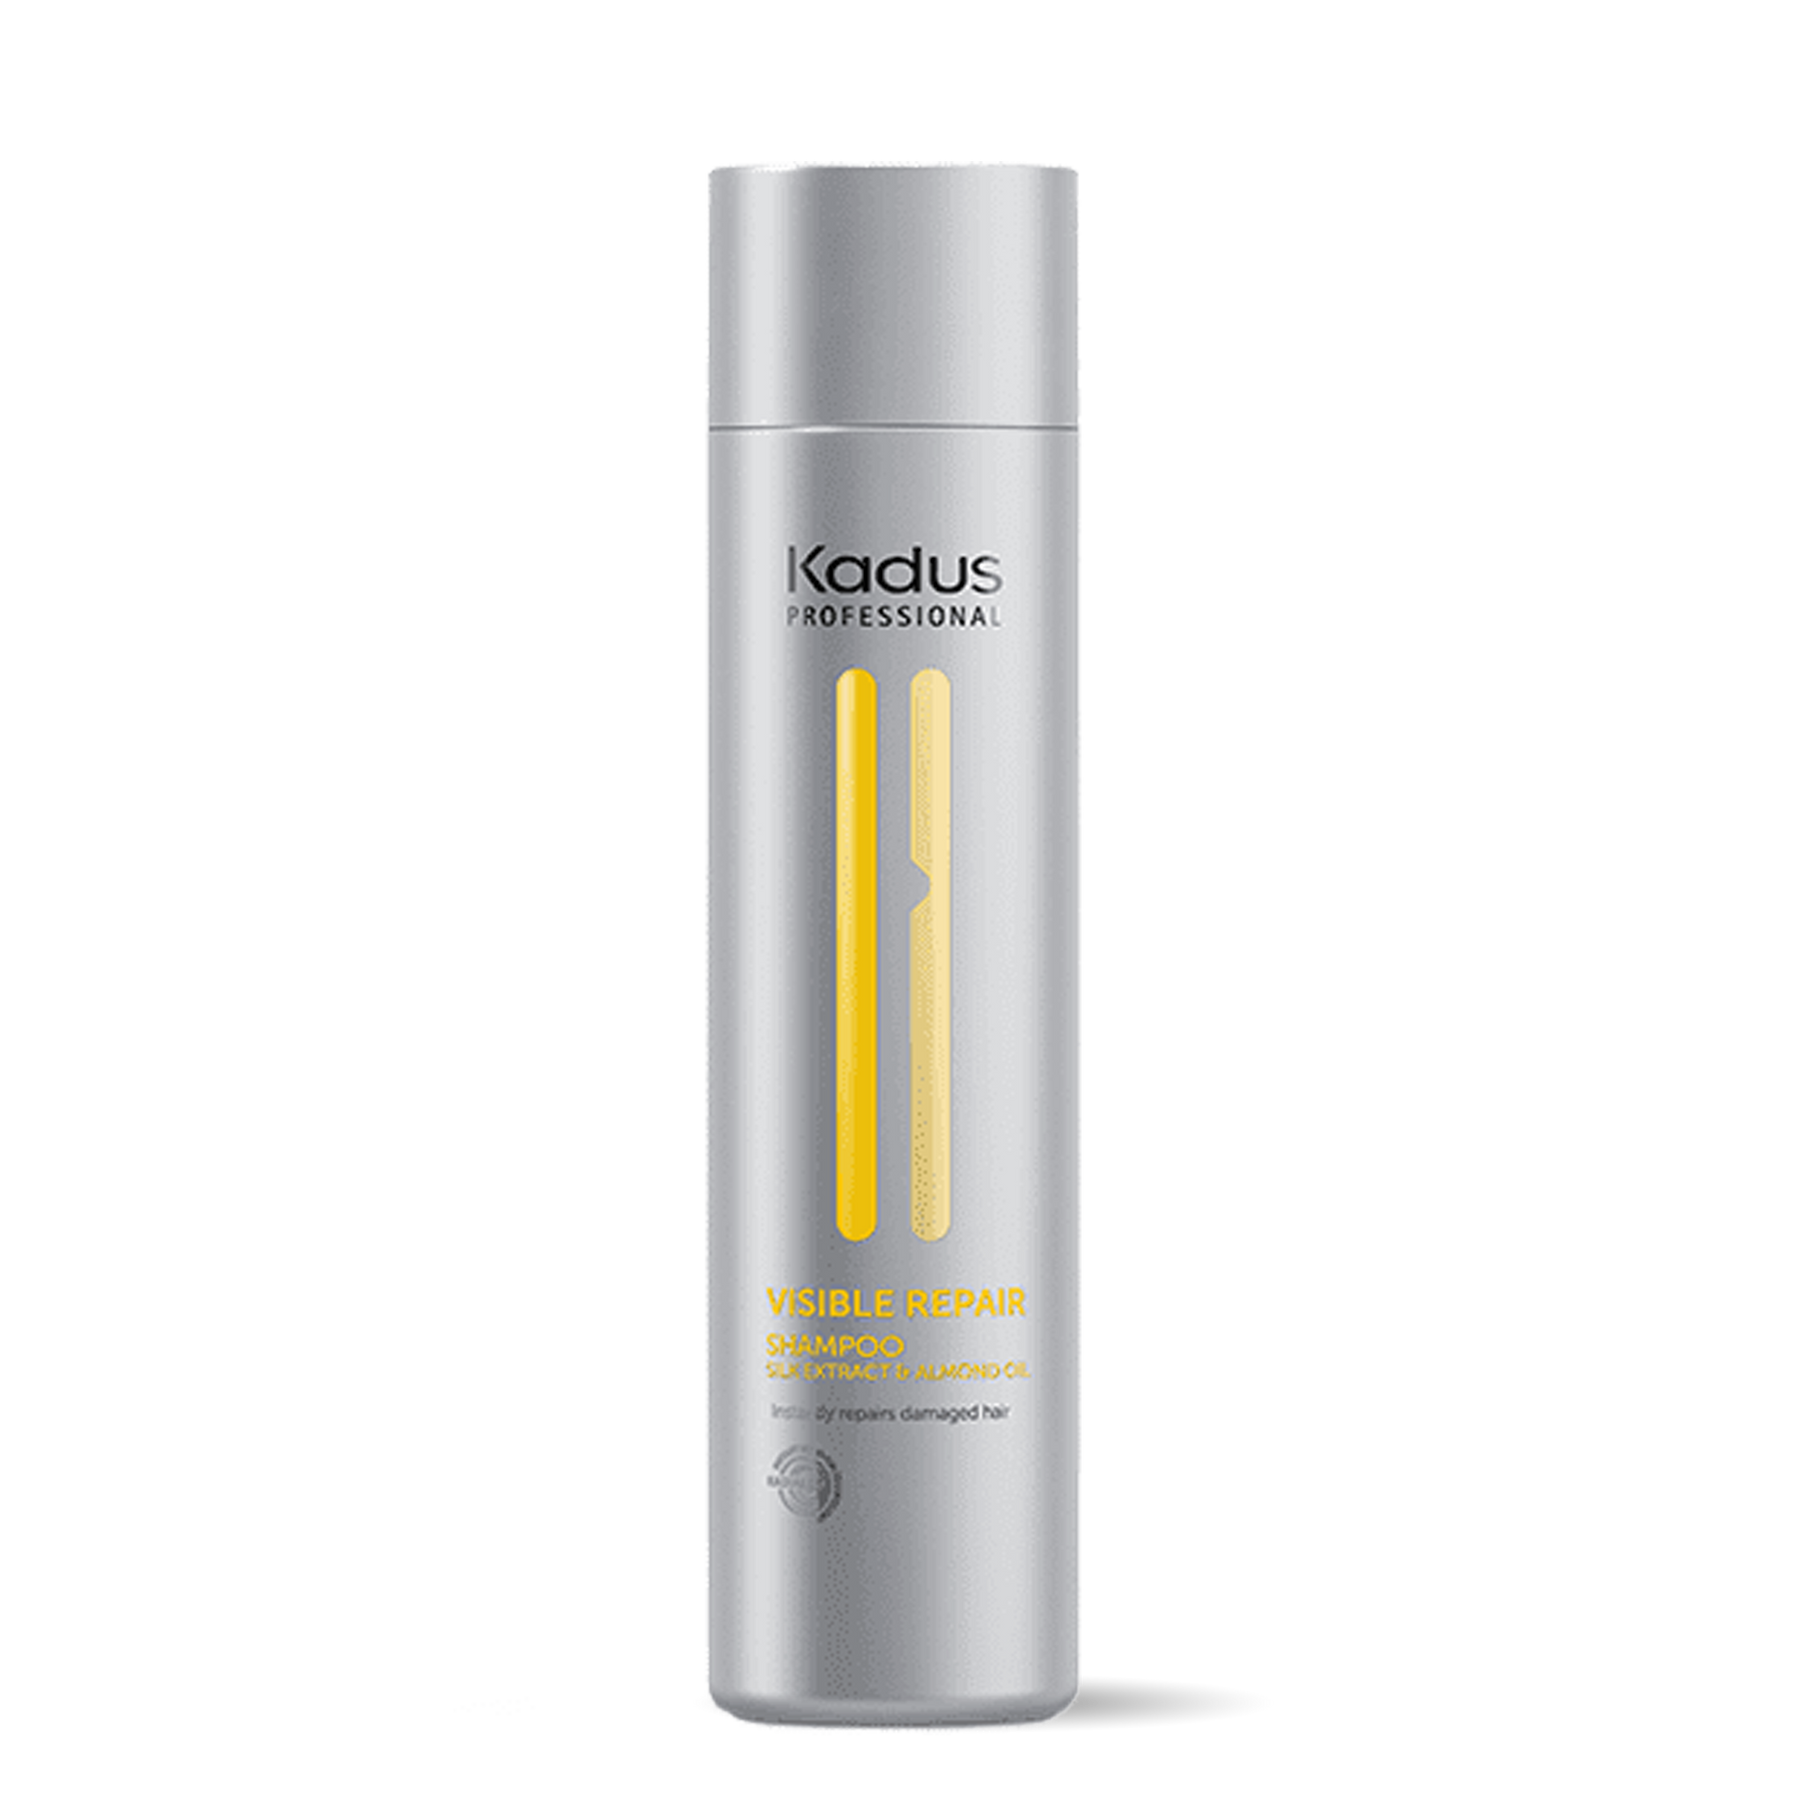 Kadus Visible Repair Shampoo - by Kadus Professionals |ProCare Outlet|